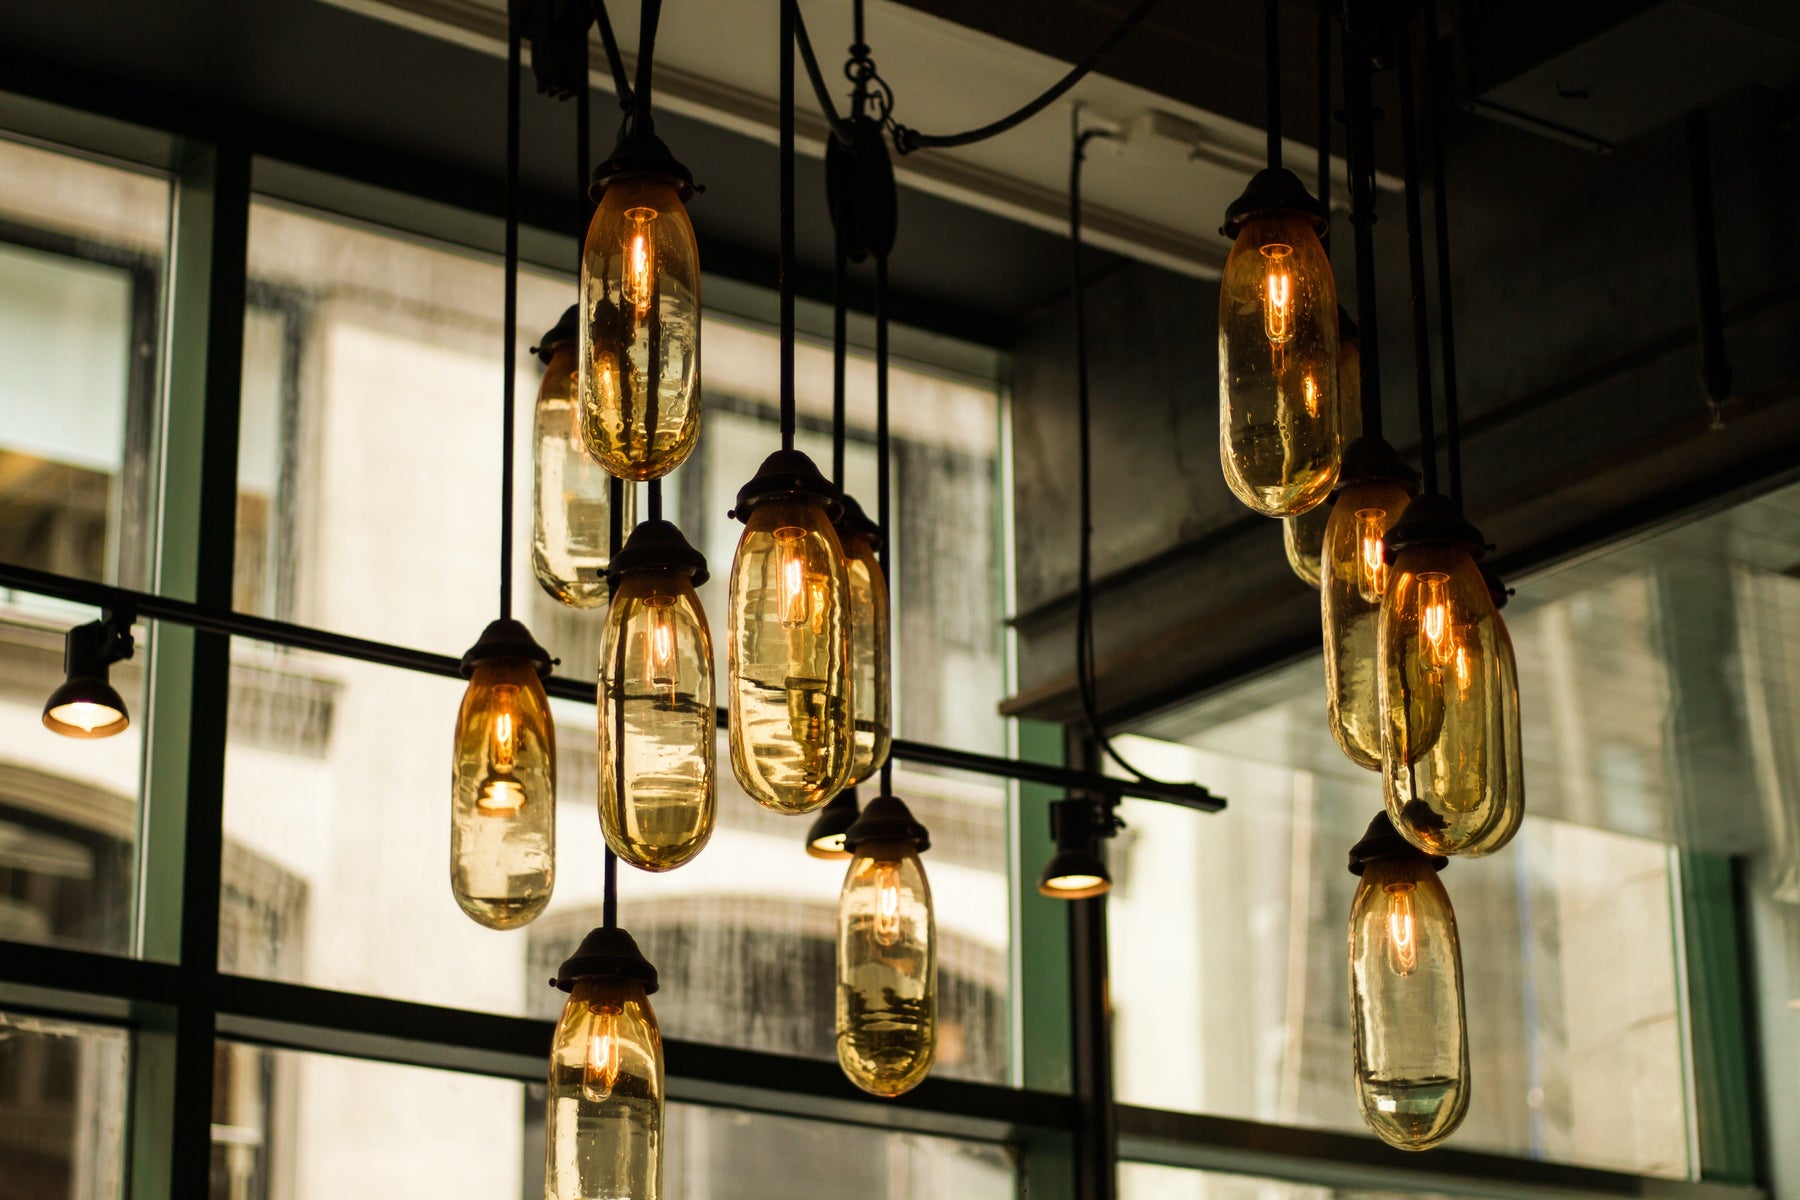 The Top 5 Most Trending Lighting Trends for 2023